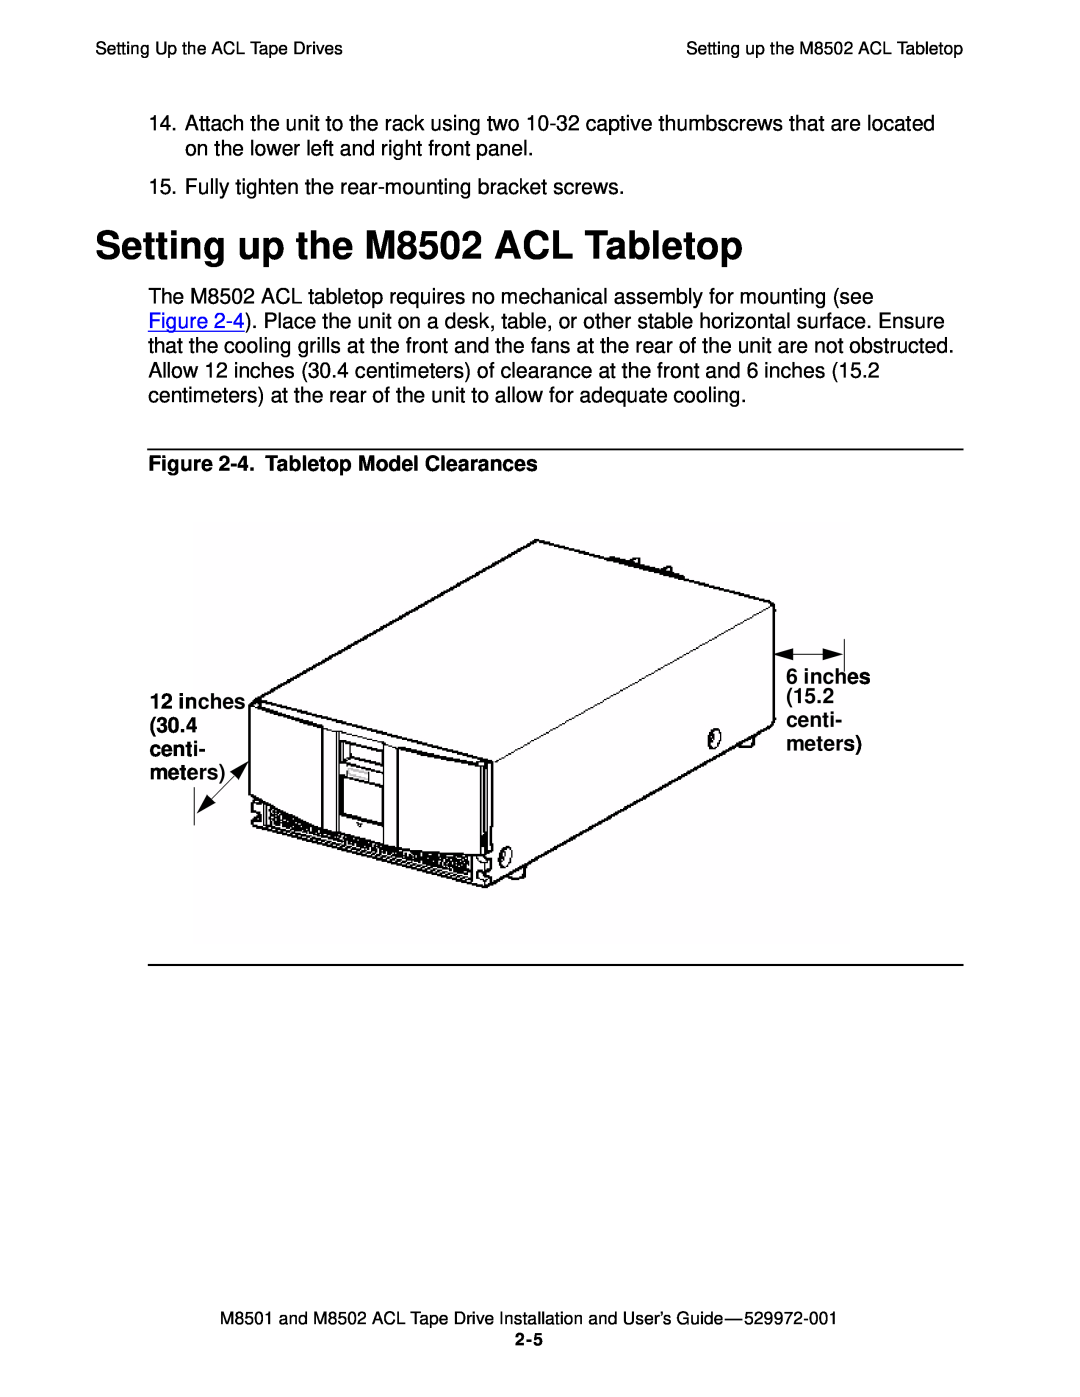 SMC Networks M8501 Setting up the M8502 ACL Tabletop, 4. Tabletop Model Clearances, inches, 15.2, 30.4, centi, meters 